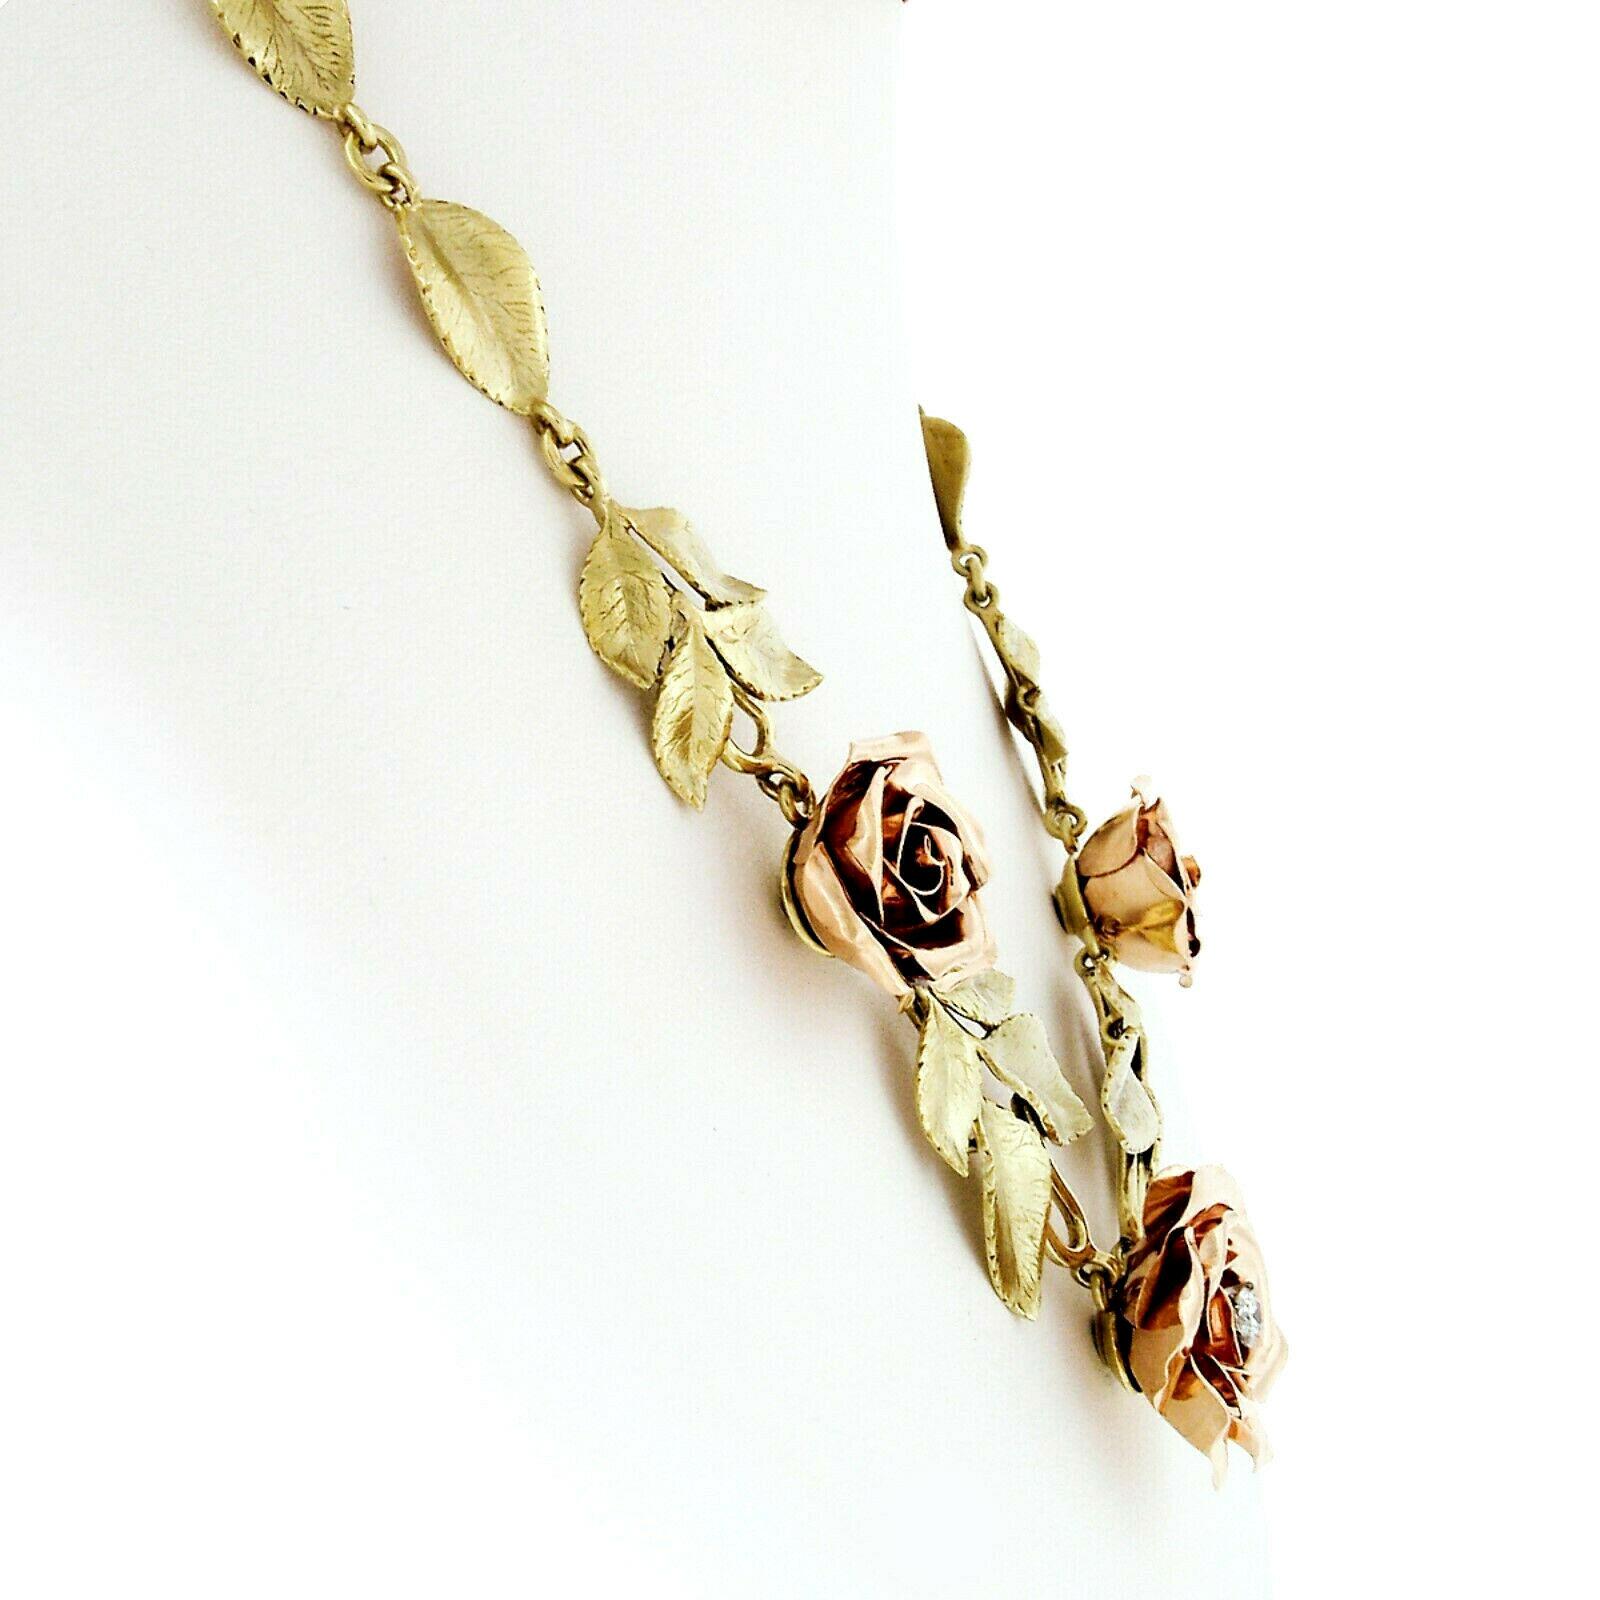 Retro Vintage 14K Rose and Green Gold Rose Flower Diamond Leaves Statement Necklace